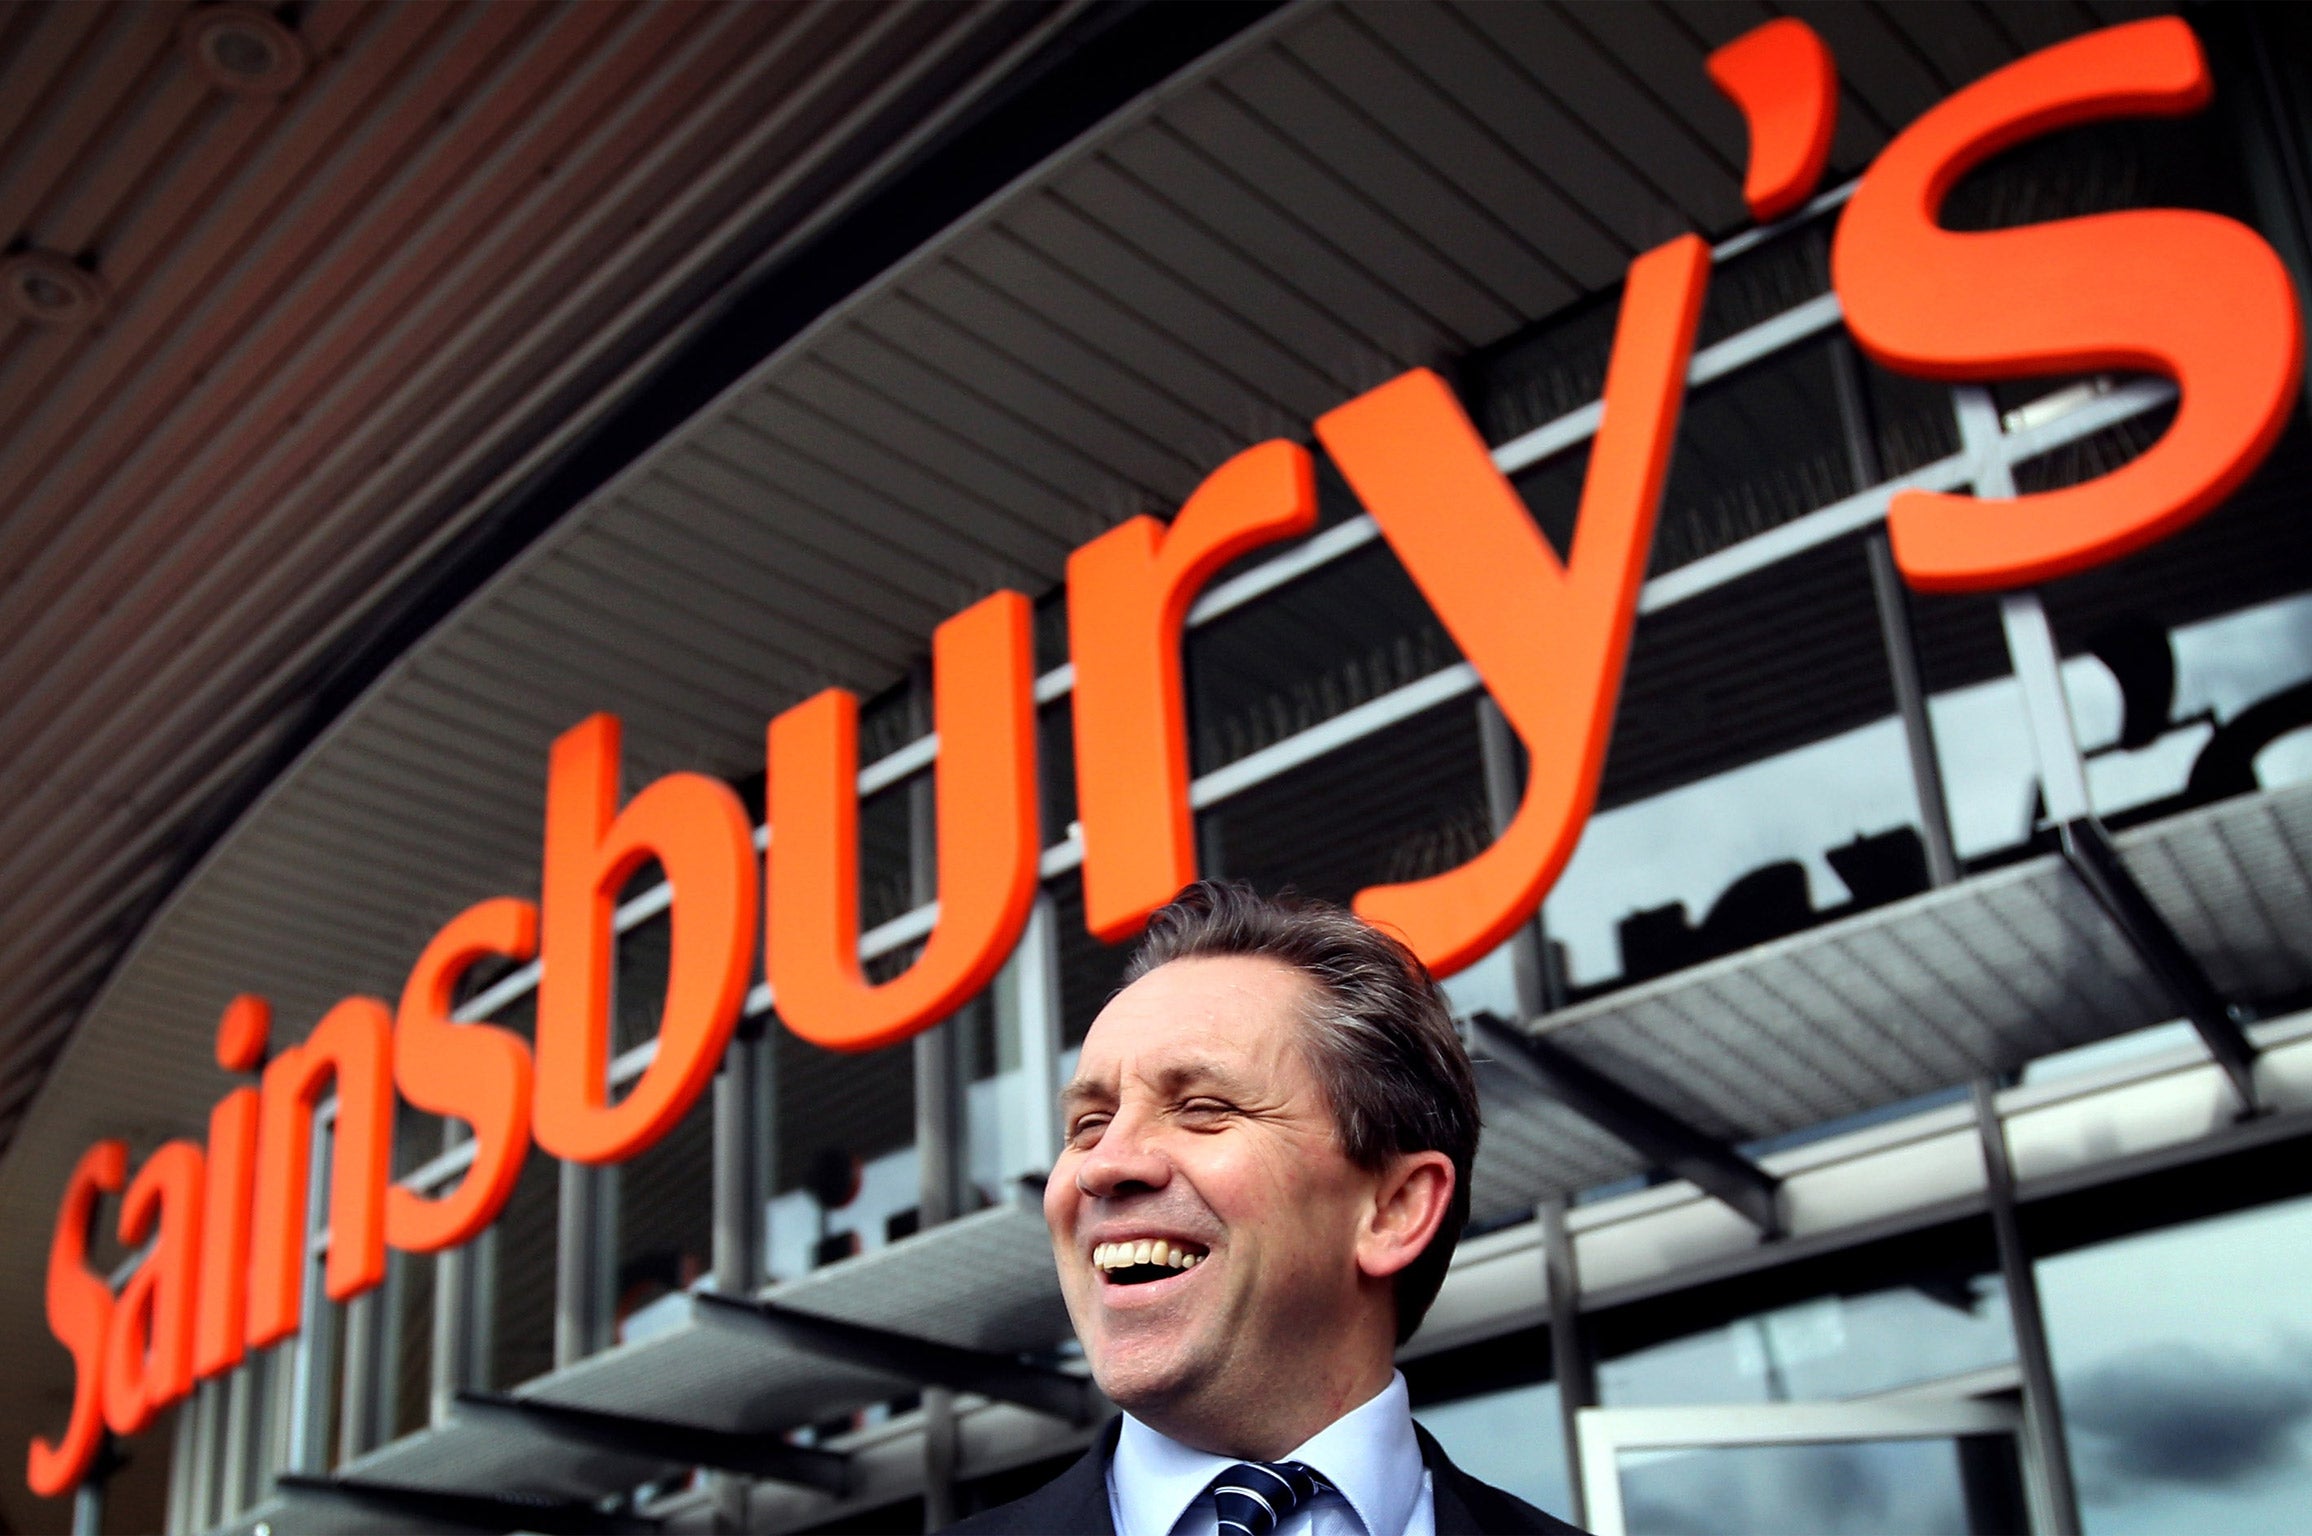 Sainsbury’s has cut prices on 1,100 products, at a cost of £150m, and vowed to stop one-off promotions such as “three for £10” on meat products, instead making individual items cheaper